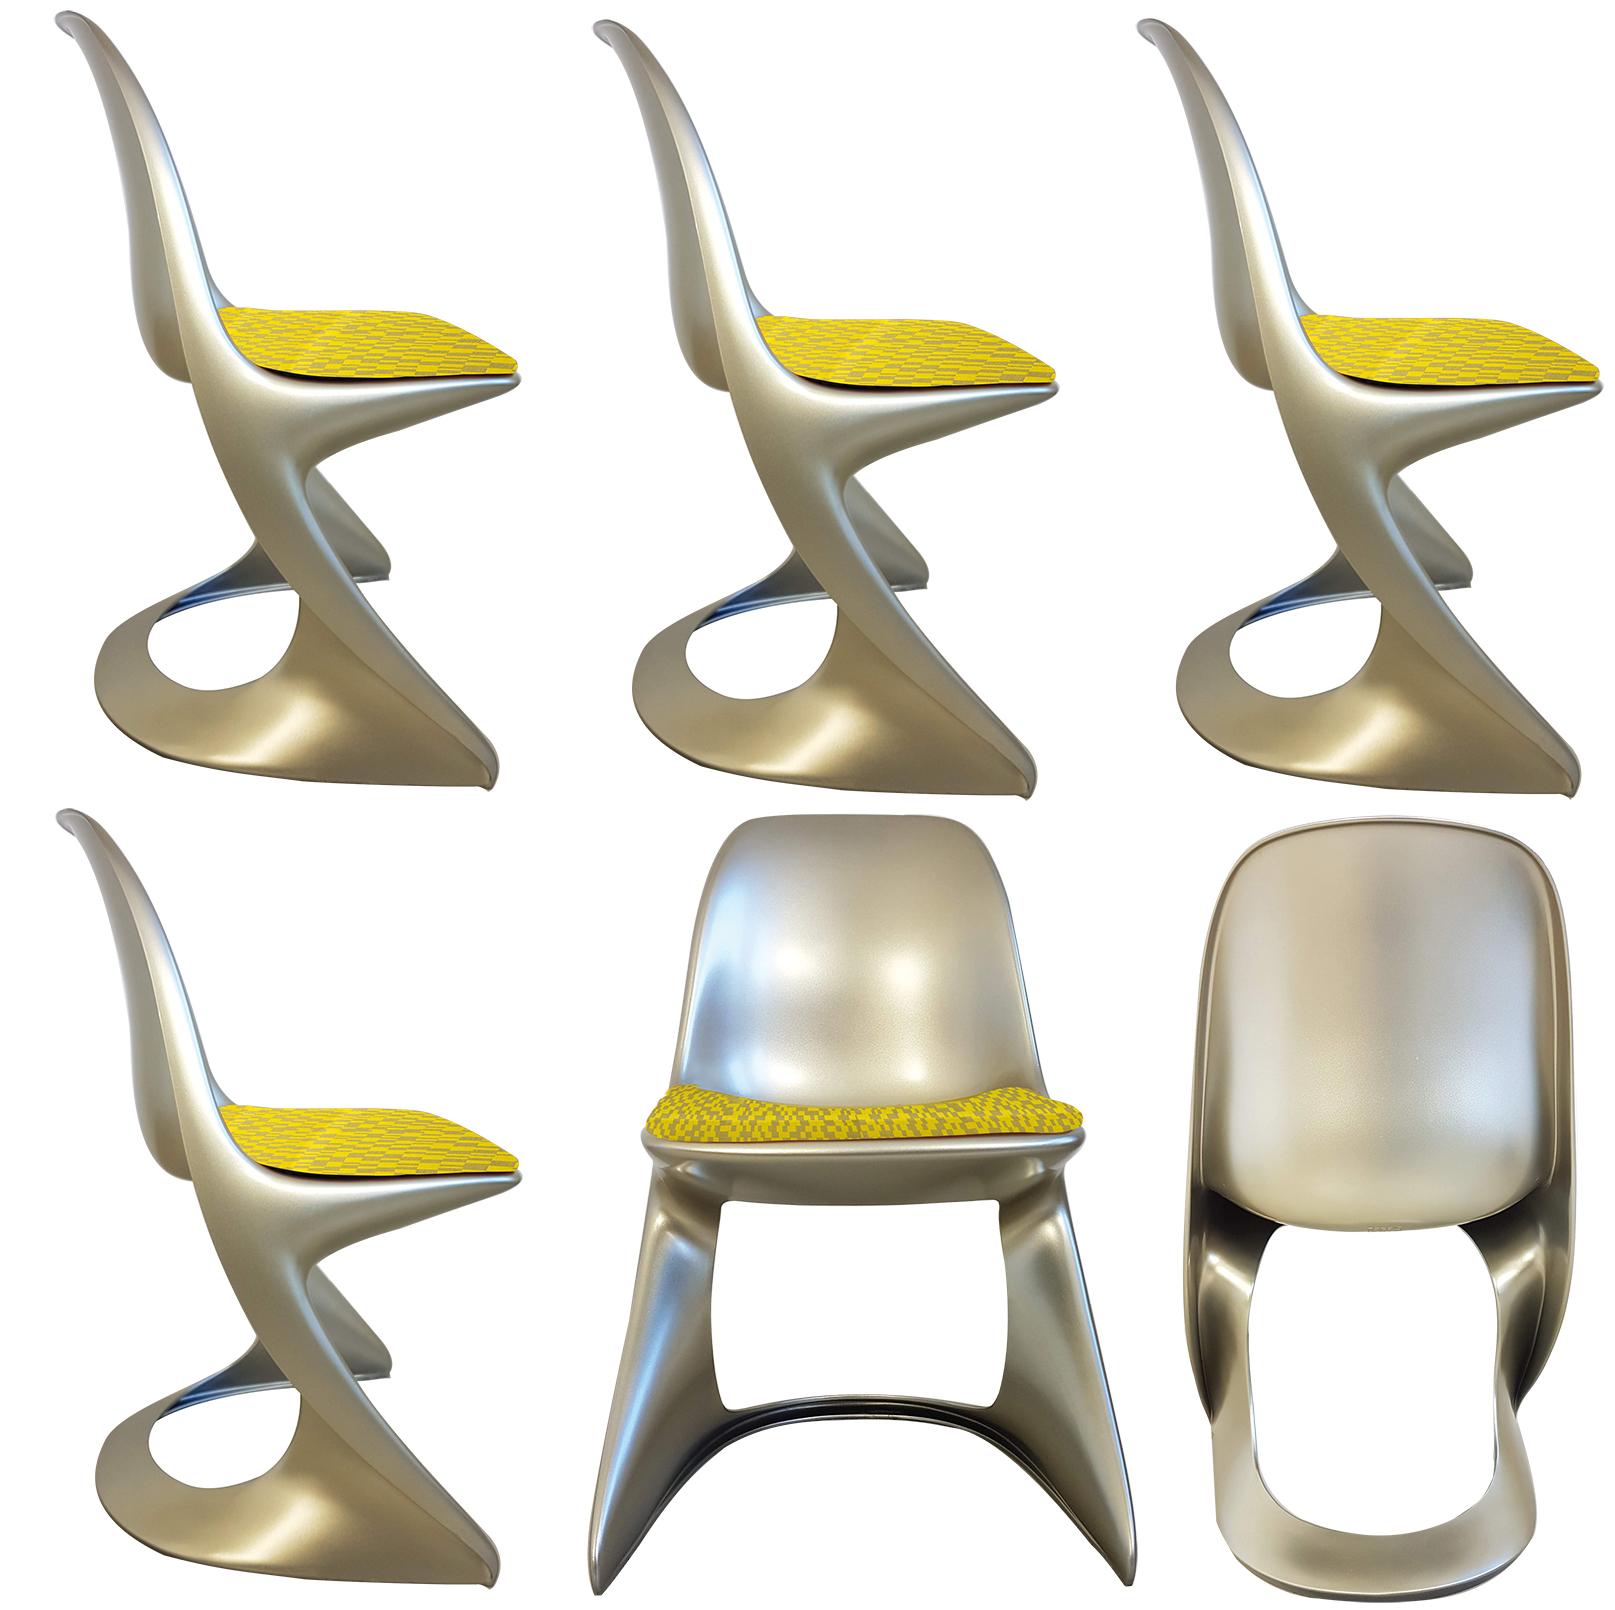 Unusual set of Ostergaard polyethylene in lacquered metallic color made by rotational molding fixed (indoor/outdoor use) chairs with new seats made of geometric woven jacquard textile fabric 